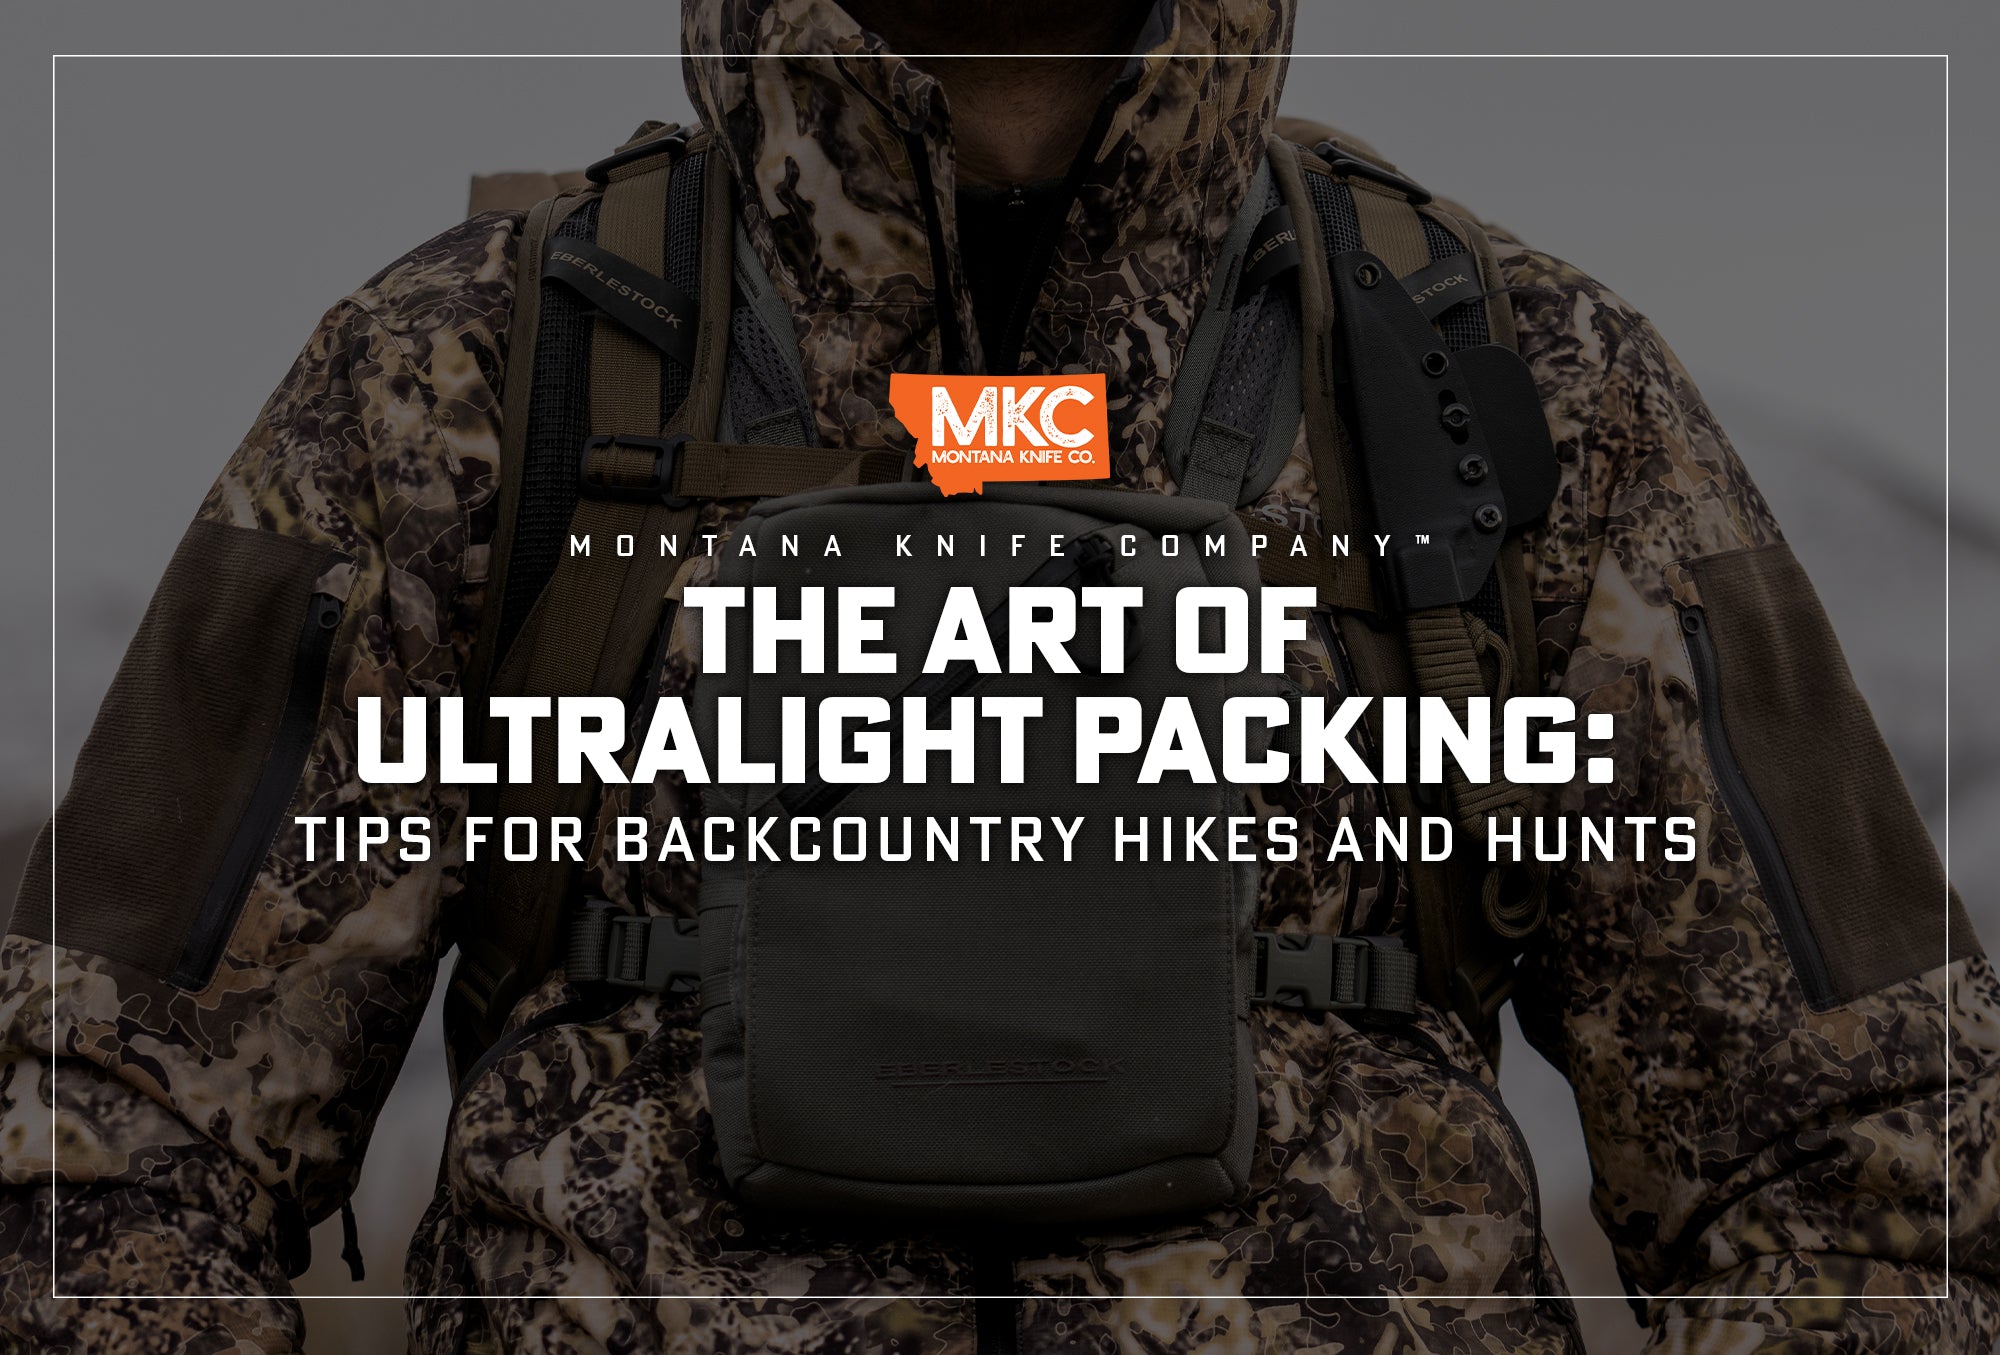 A hunter wearing camo and a pack demonstrates the art of ultralight backpacking.